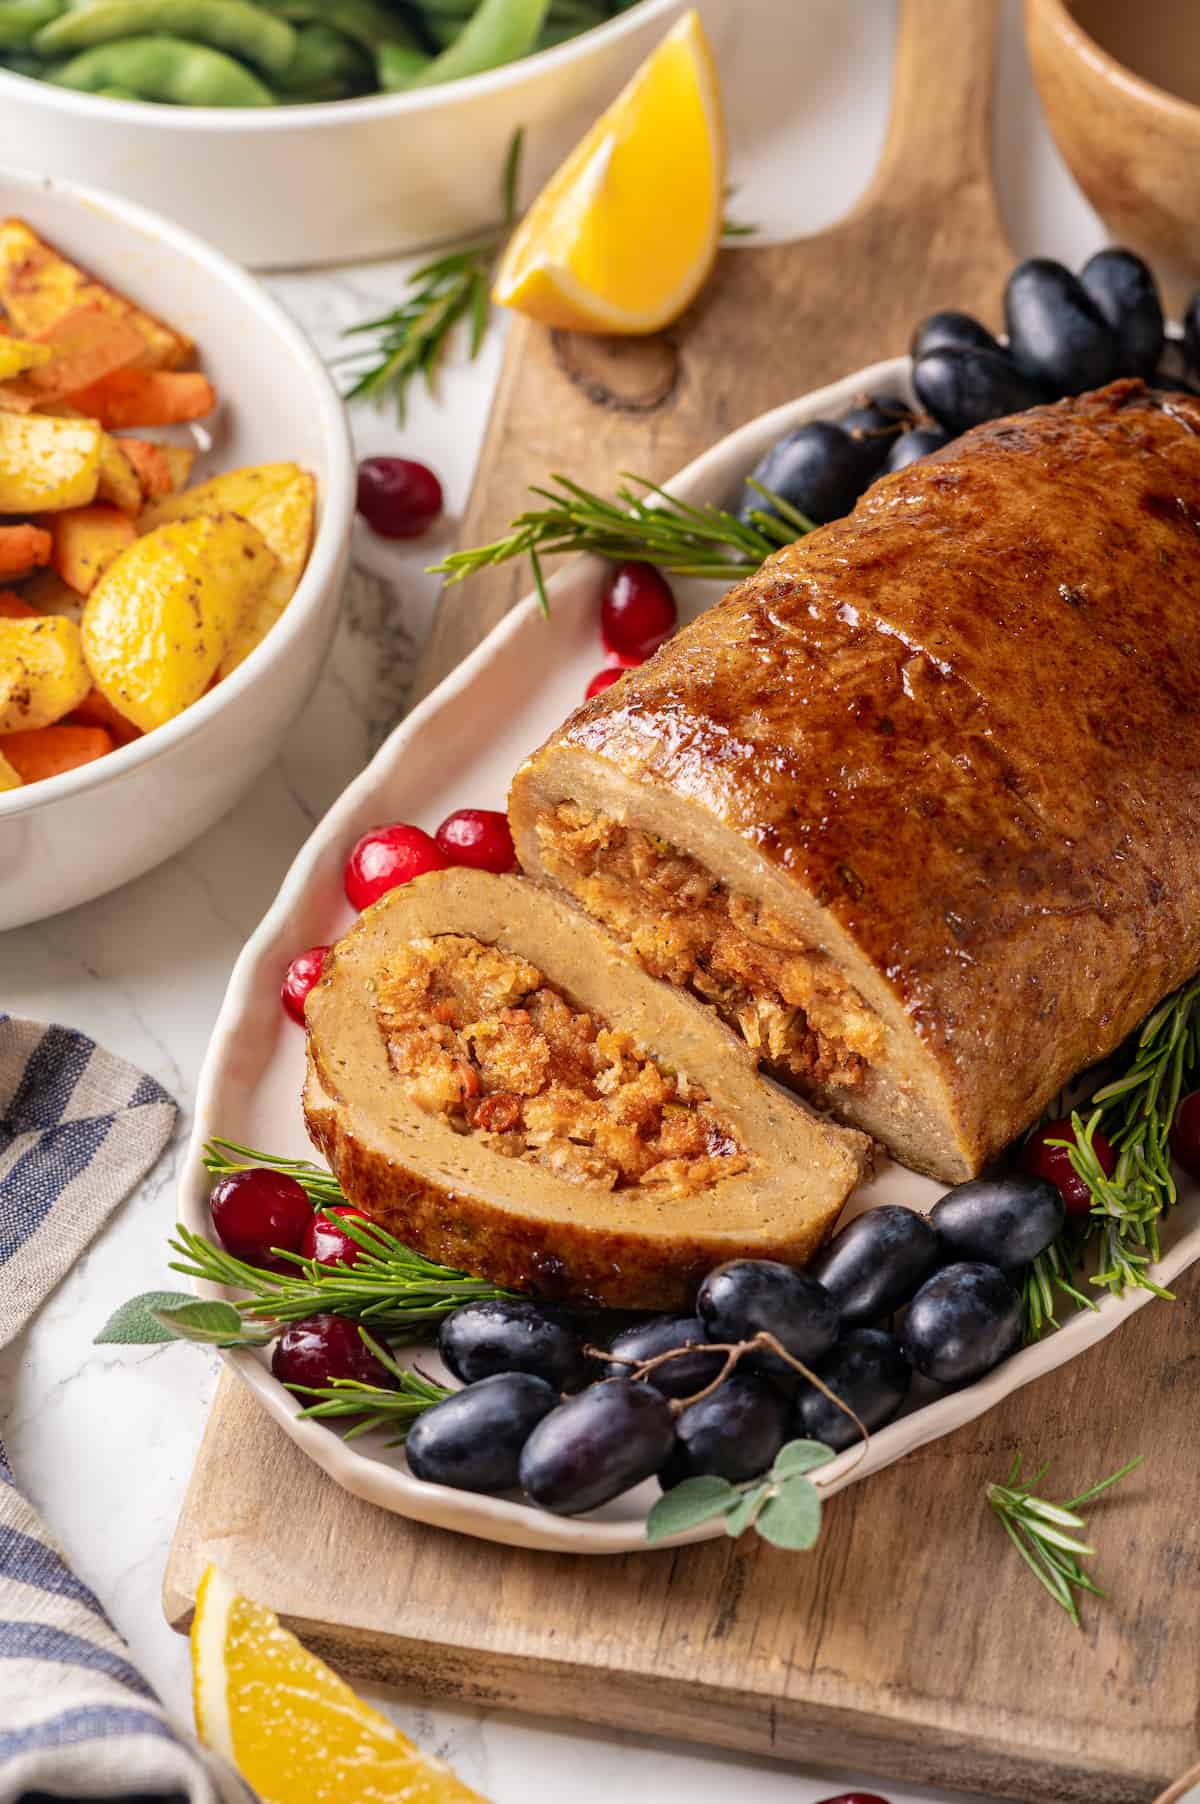 Vegan turkey on platter with one slice cut to show stuffing inside